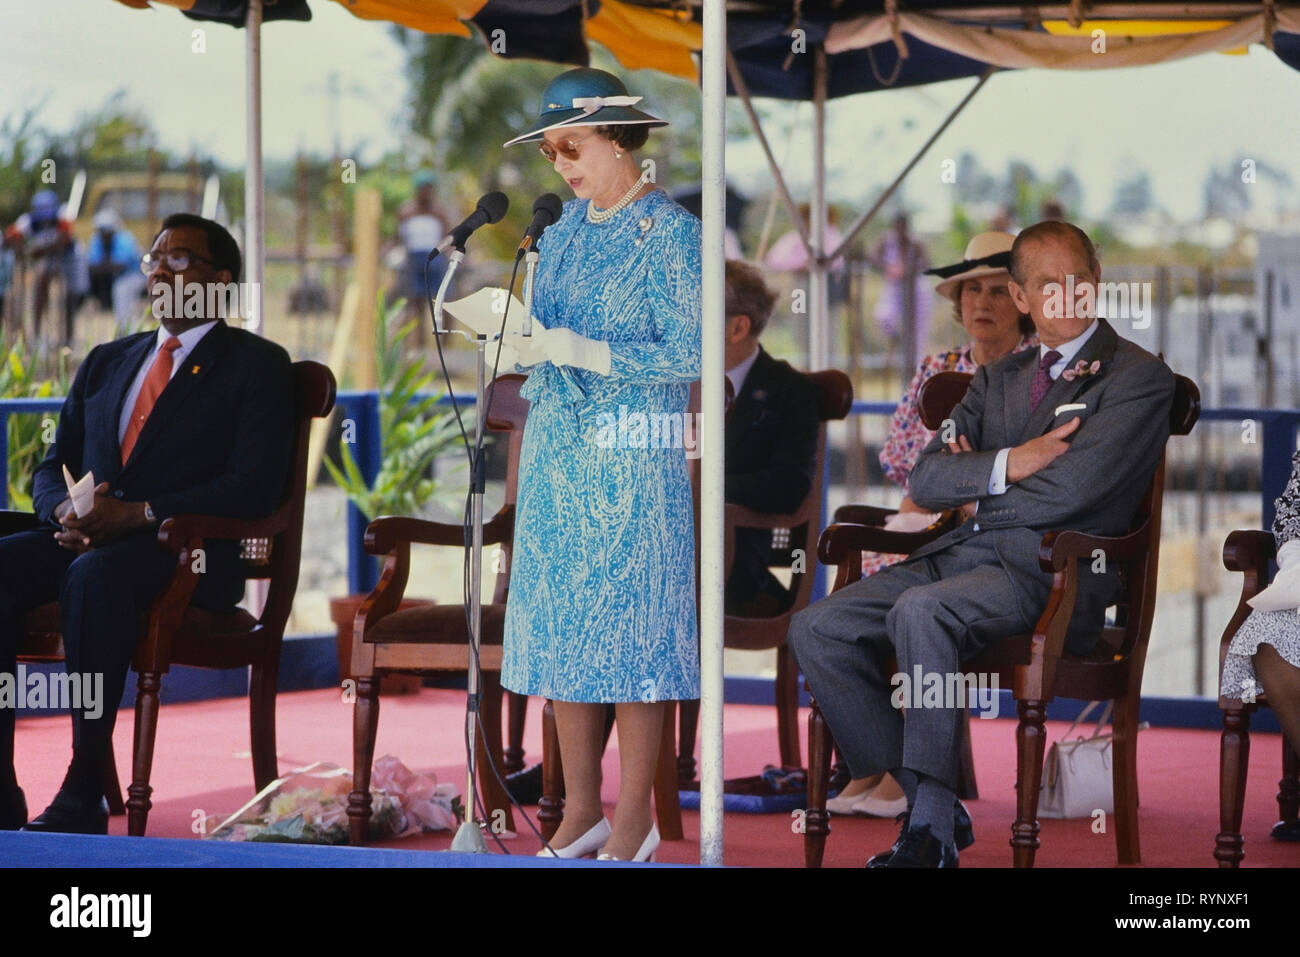 Queen Elizabeth II & Prince Philip visit to Queen's College to officiate at the stone laying ceremony for the school's new building. Barbados, Caribbean. 1989 Stock Photo